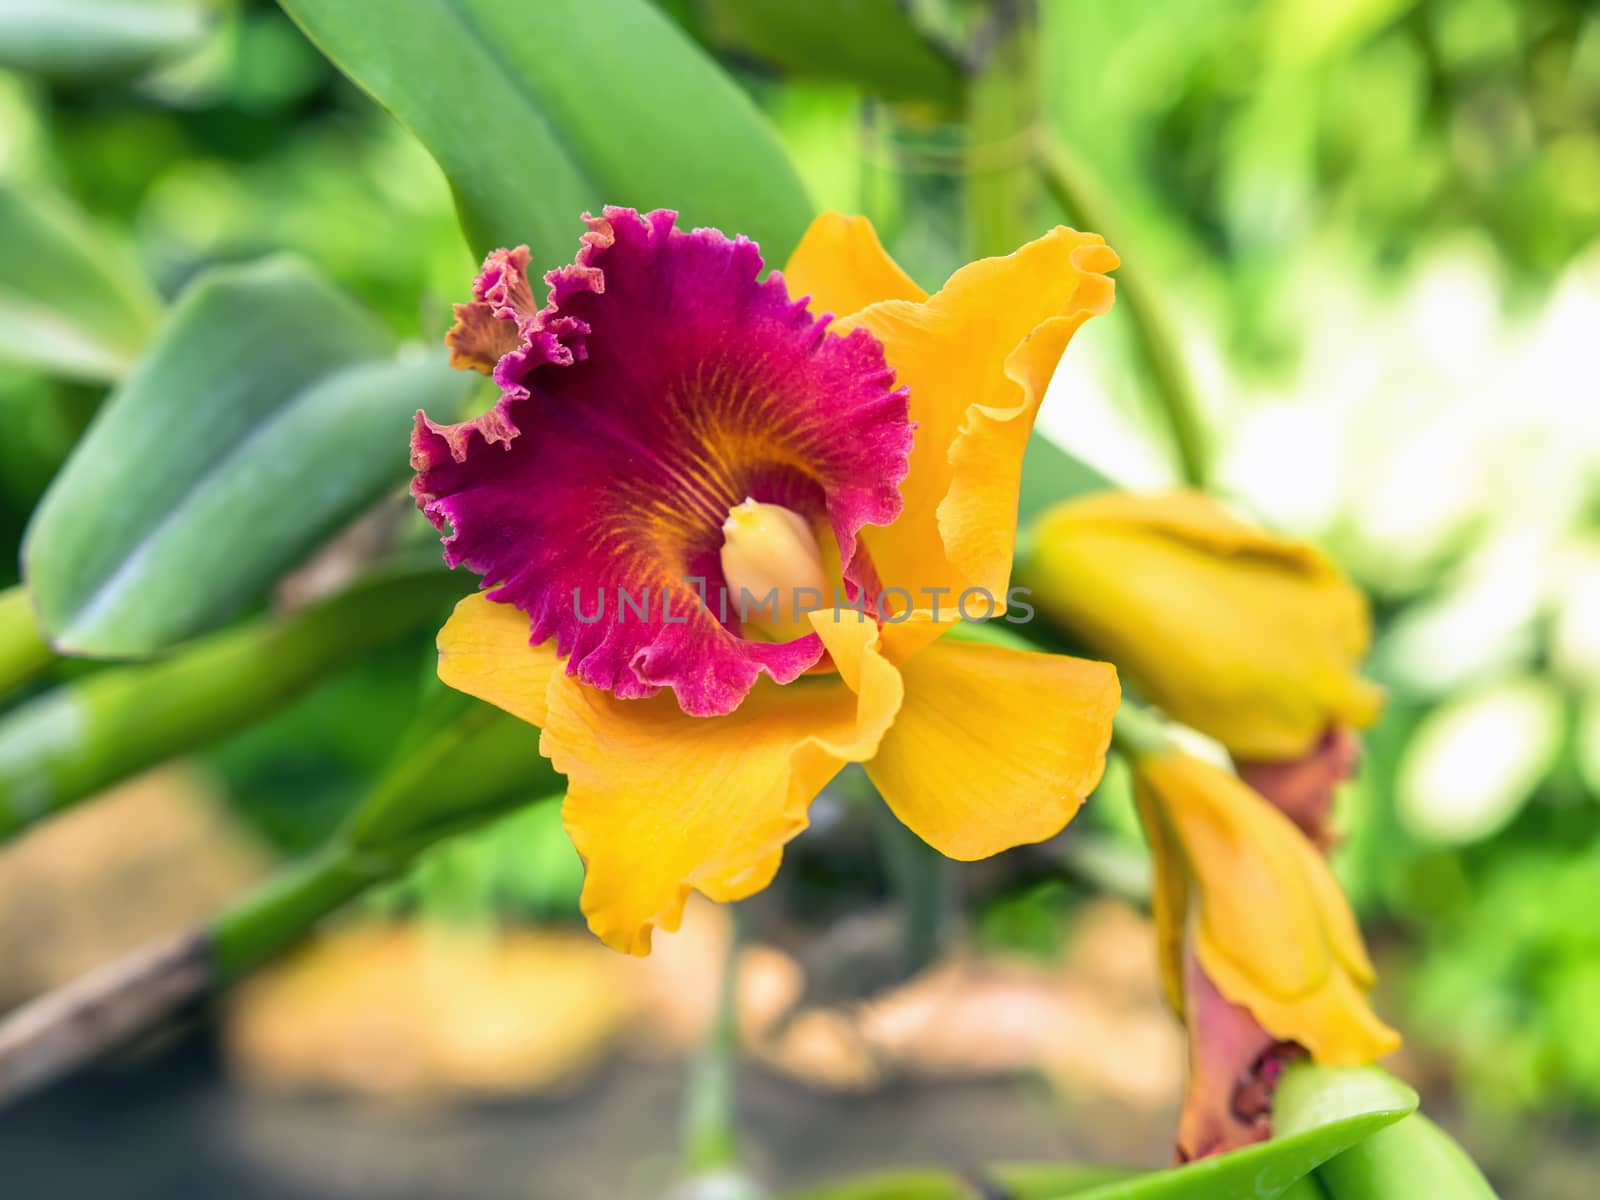 Red Yellow Orchid Flower in Garden, Pattaya. Chon Buri Province of Thailand.